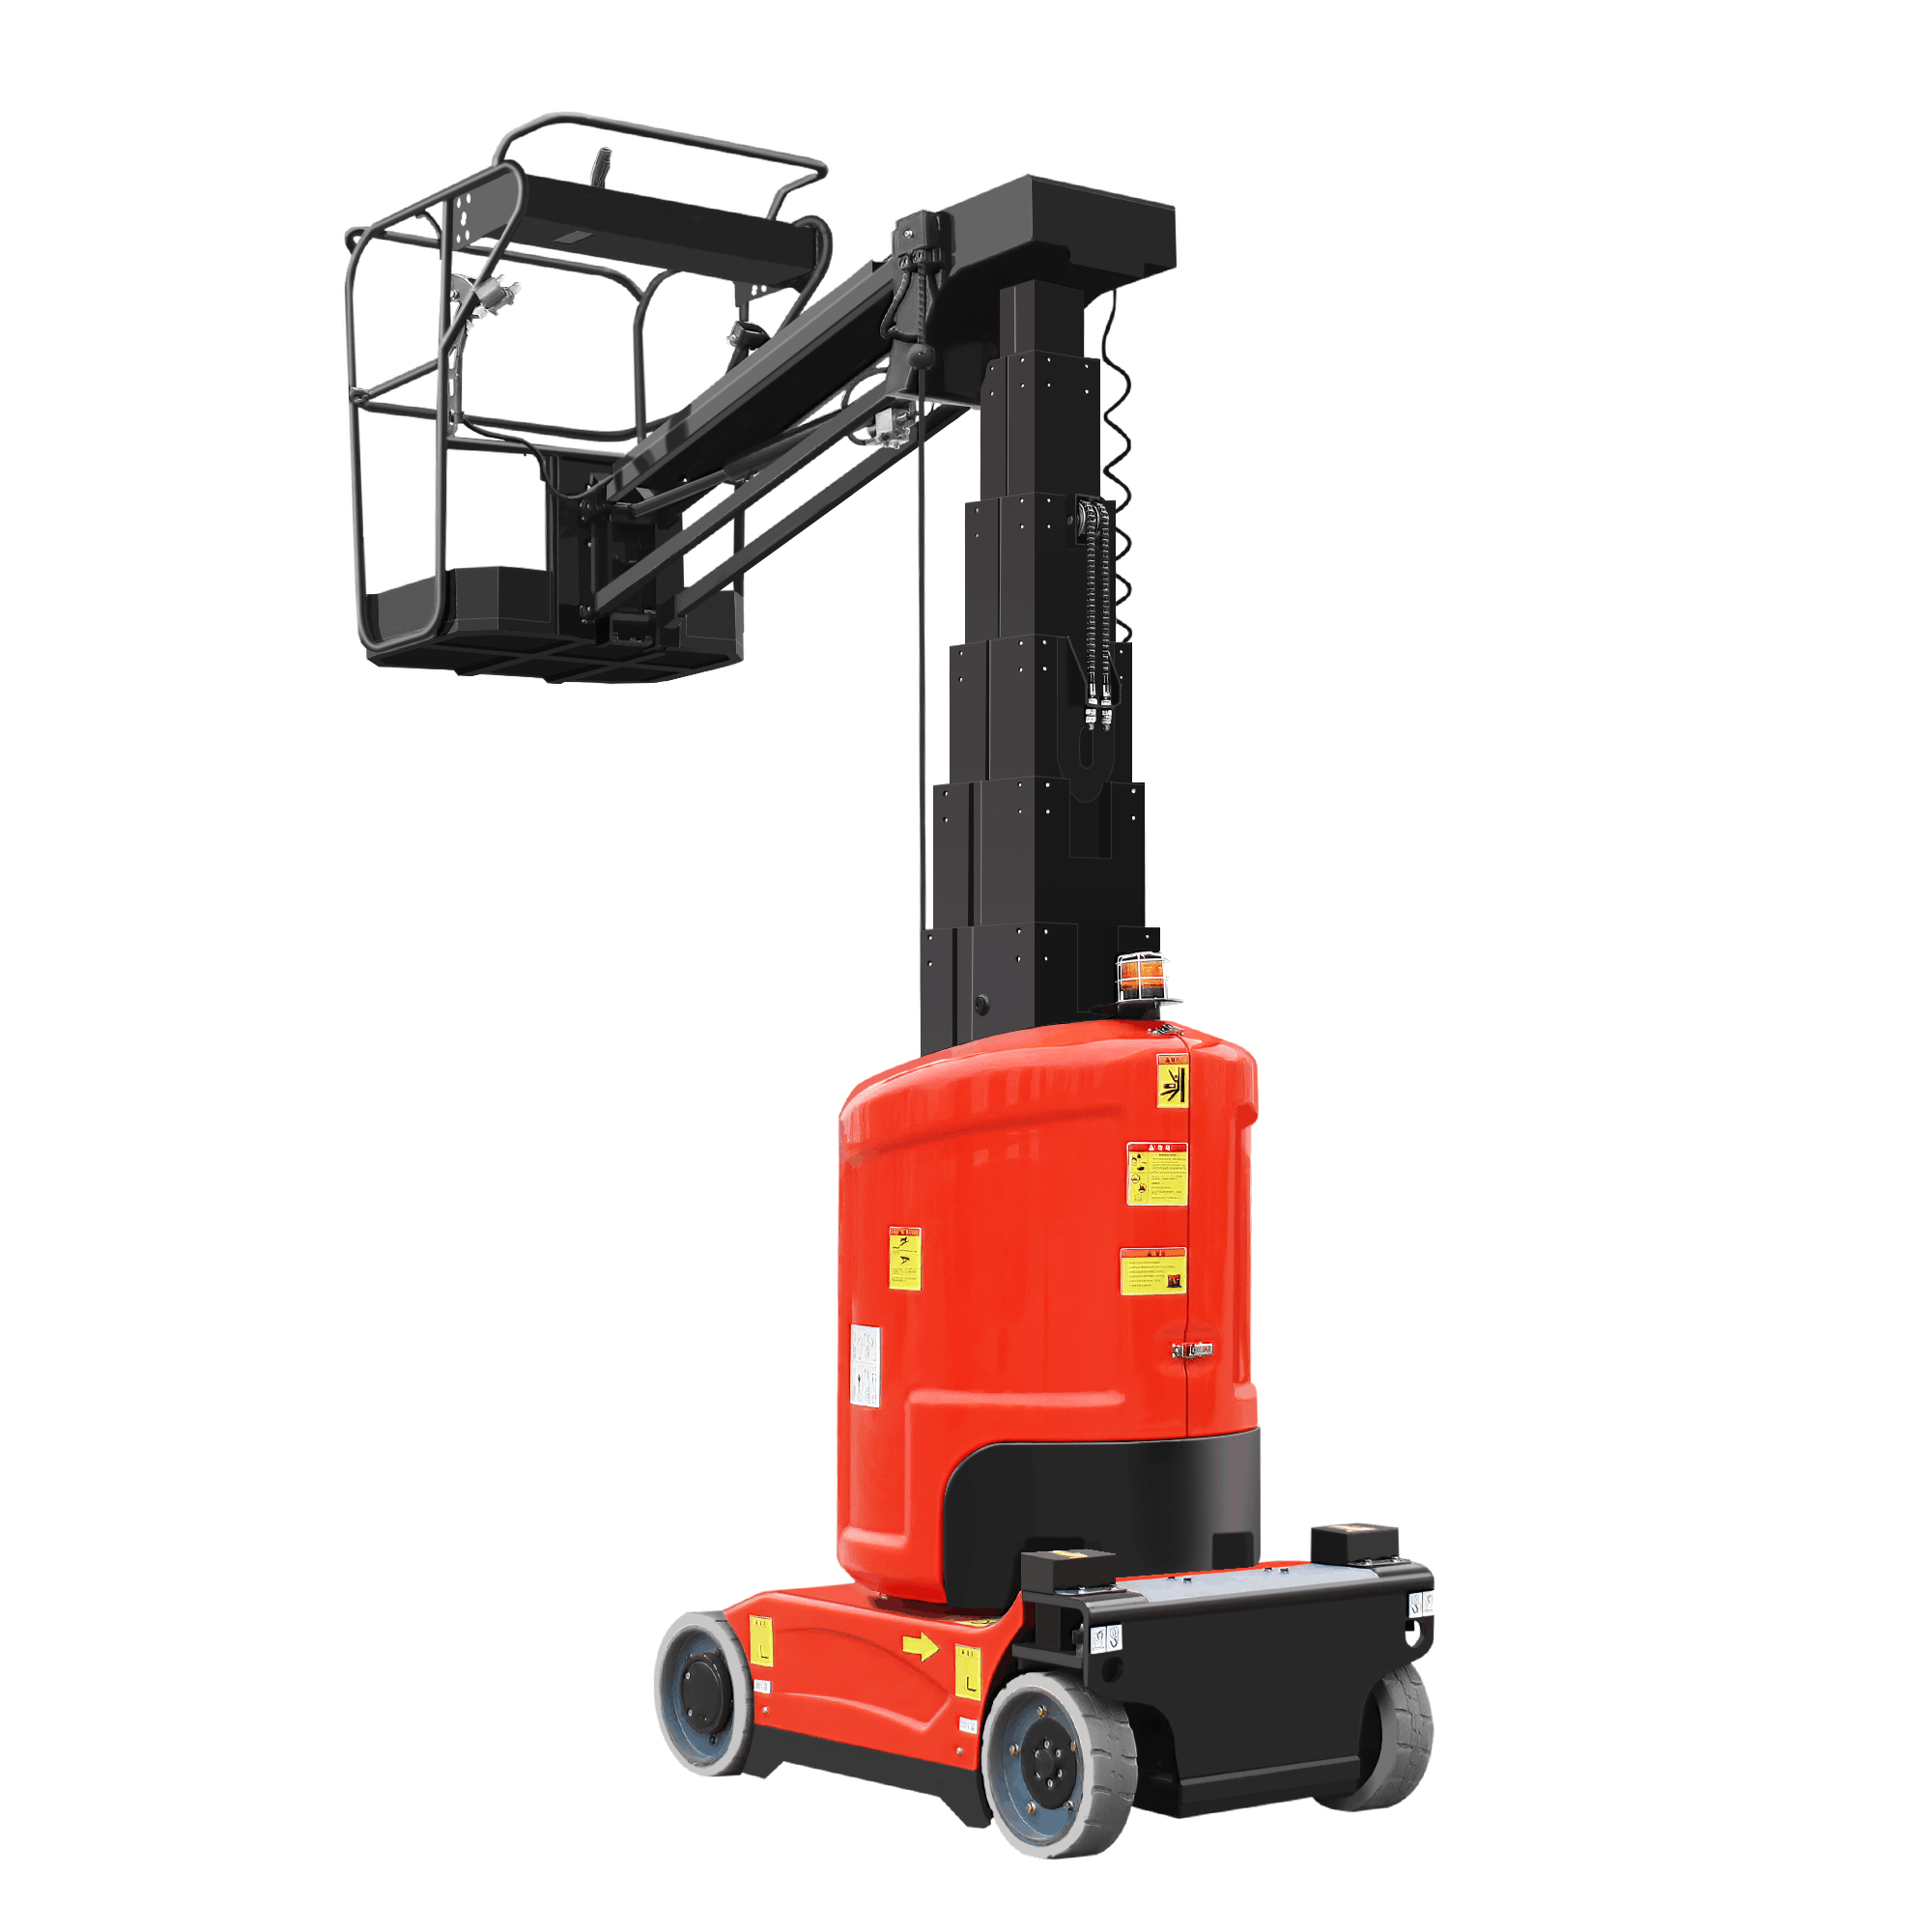 Weather-Resistant: Vertical Mast Boom Lift with Jib for Outdoor Applications